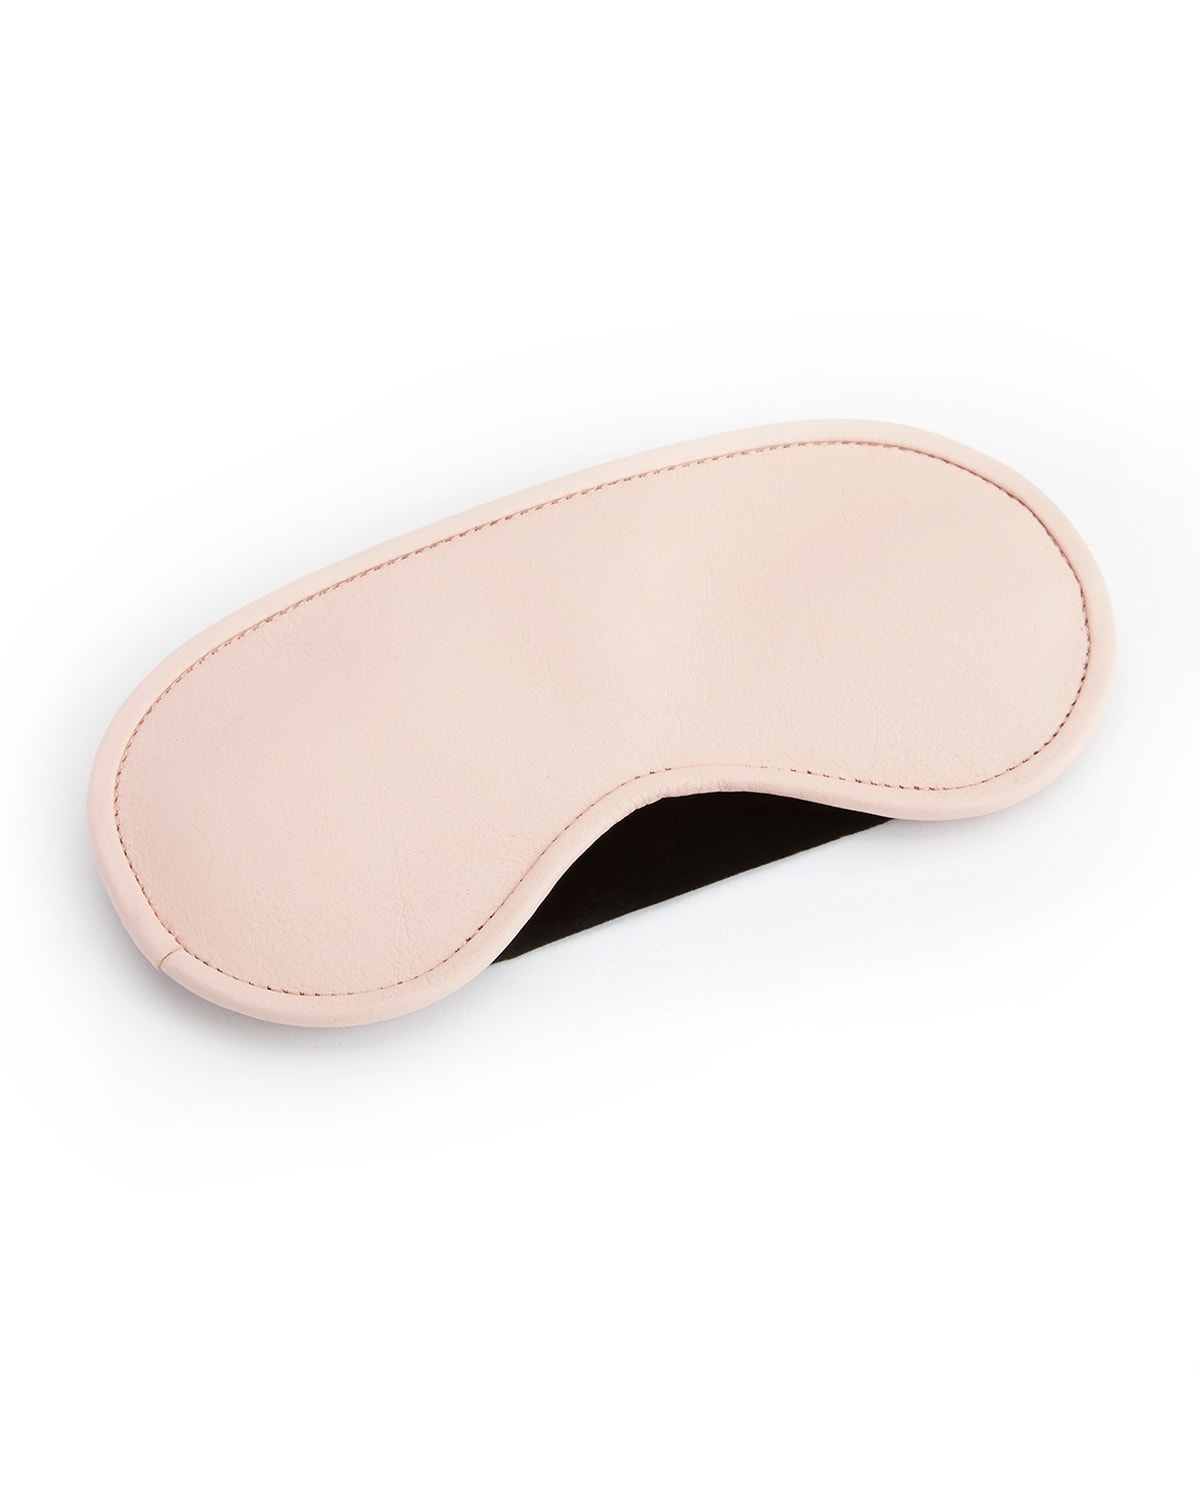 Shop Royce New York Luxe Sleep Mask In Blush Pink